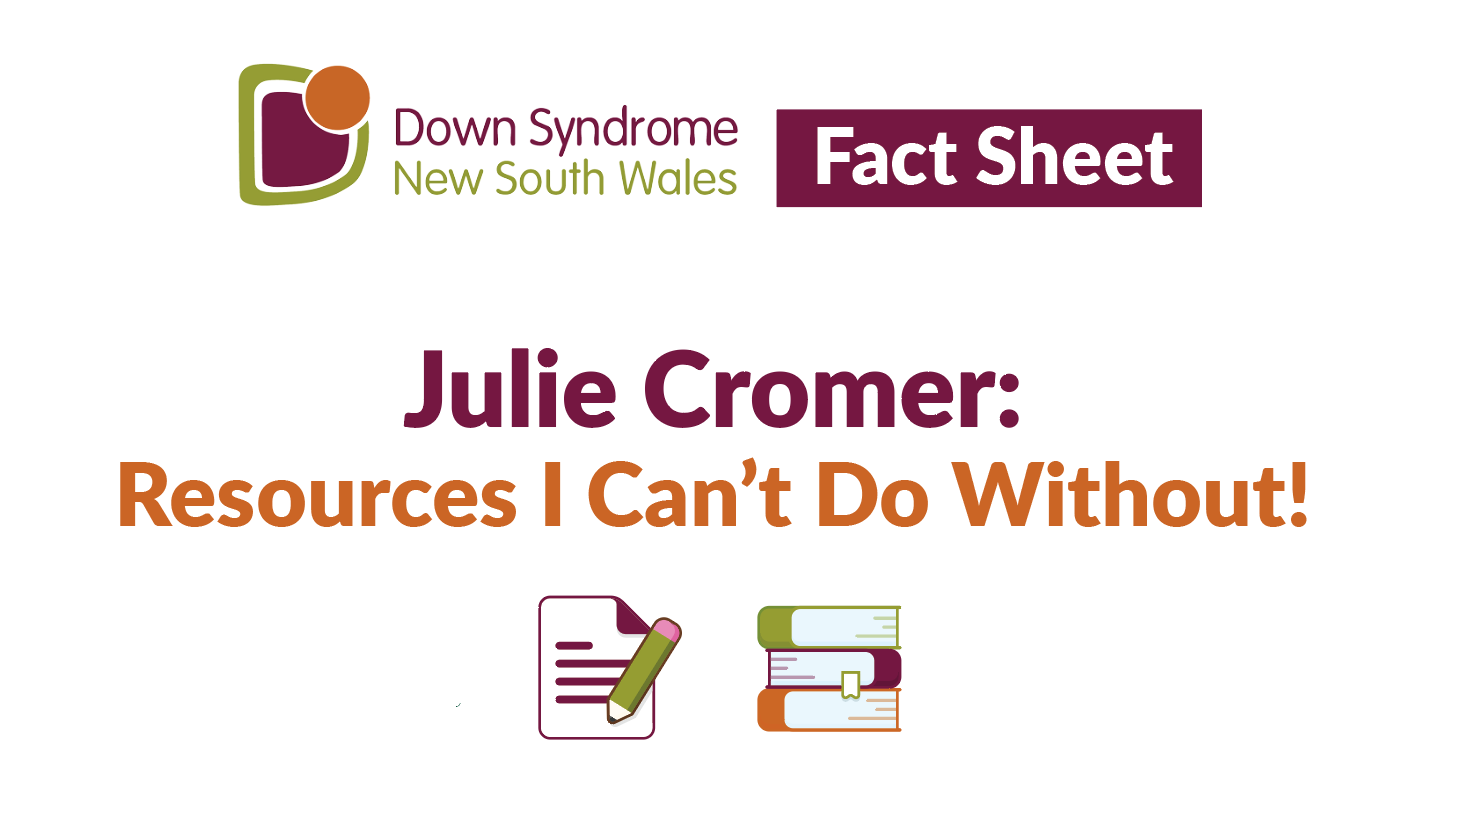 Julie Cromer:  Resources I Can’t Do Without!